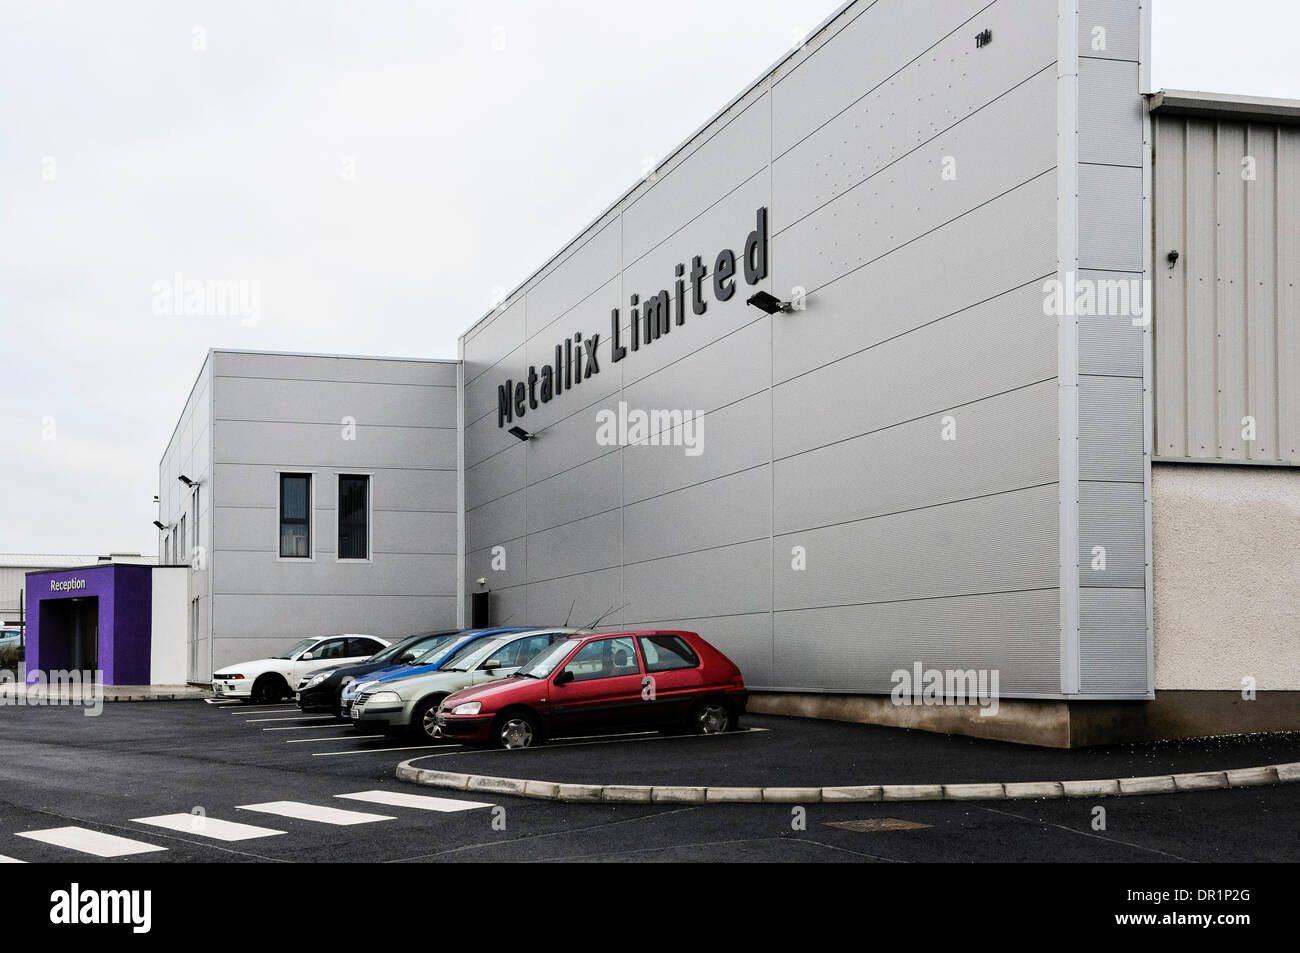 Ballymena, Northern Ireland. 17 Jan 2014 - Metallix Limited fabrication plant in Ballymena, Northern Ireland, which specialises in precision laser cutting of steel and aluminium.  Part of the Wrightbus group. Credit:  Stephen Barnes/Alamy Live News Stock Photo